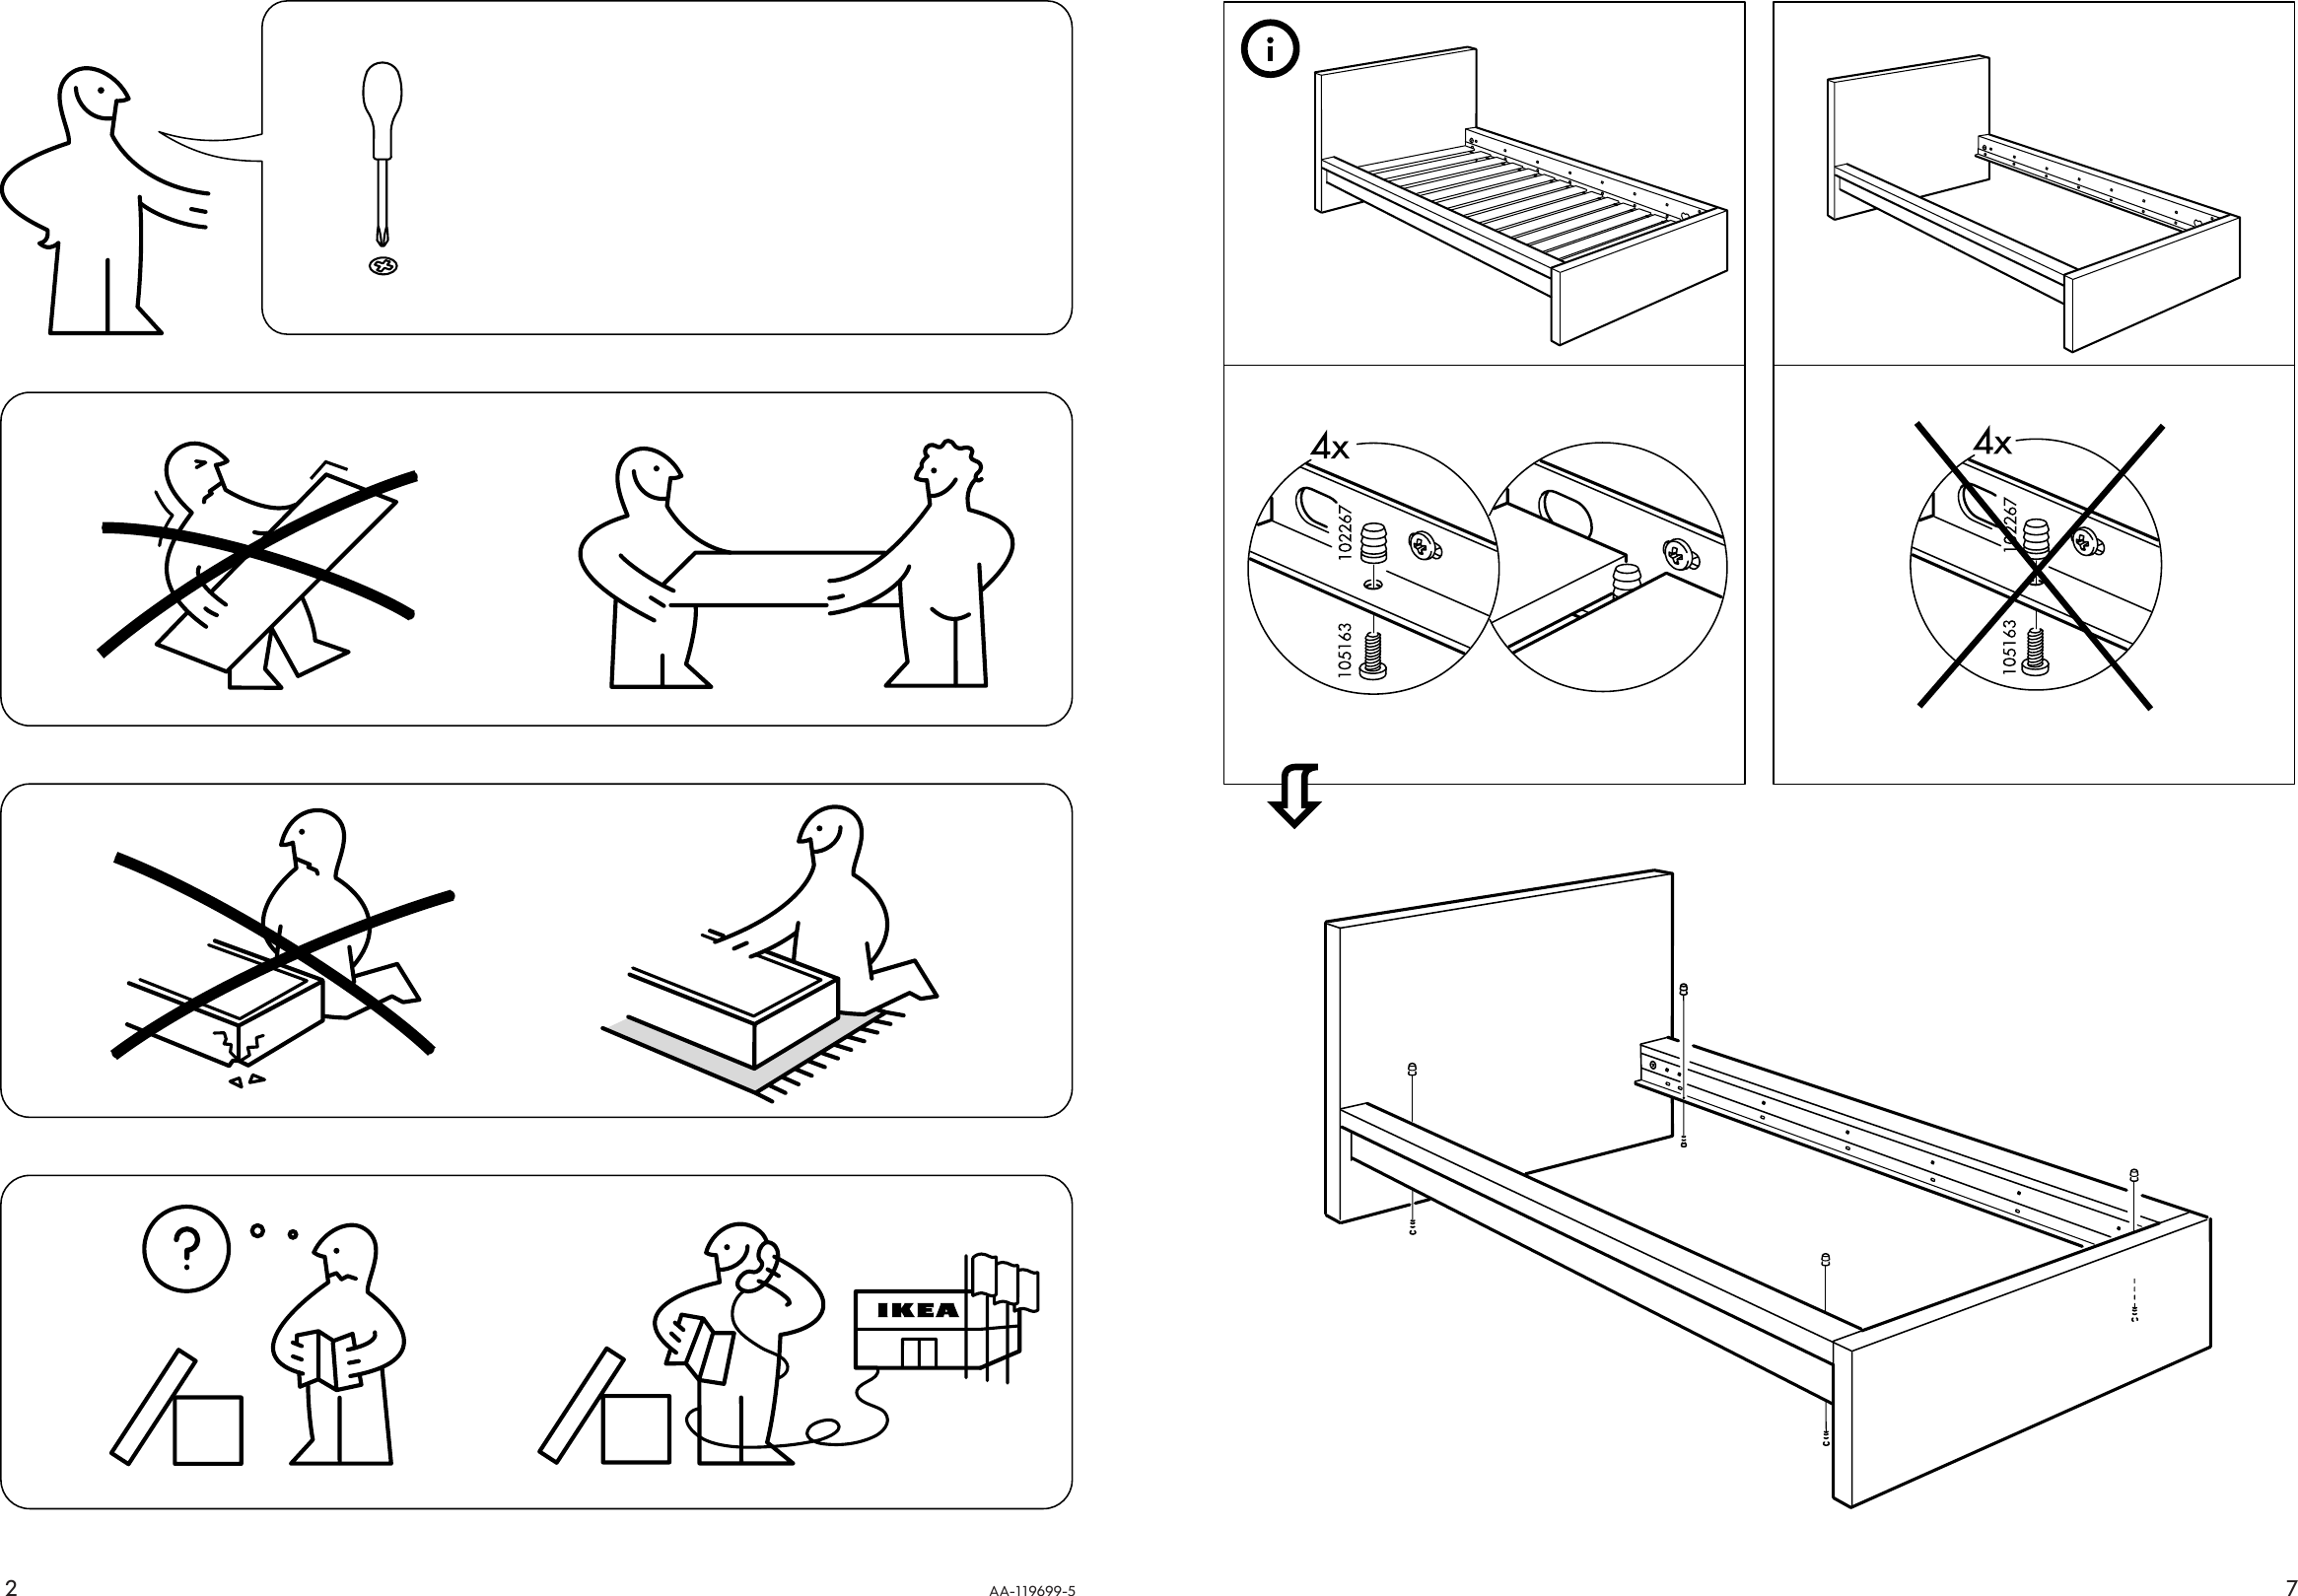 Ikea Malm Bed Frame Twin Assembly, Ikea Malm High Bed Frame Instructions